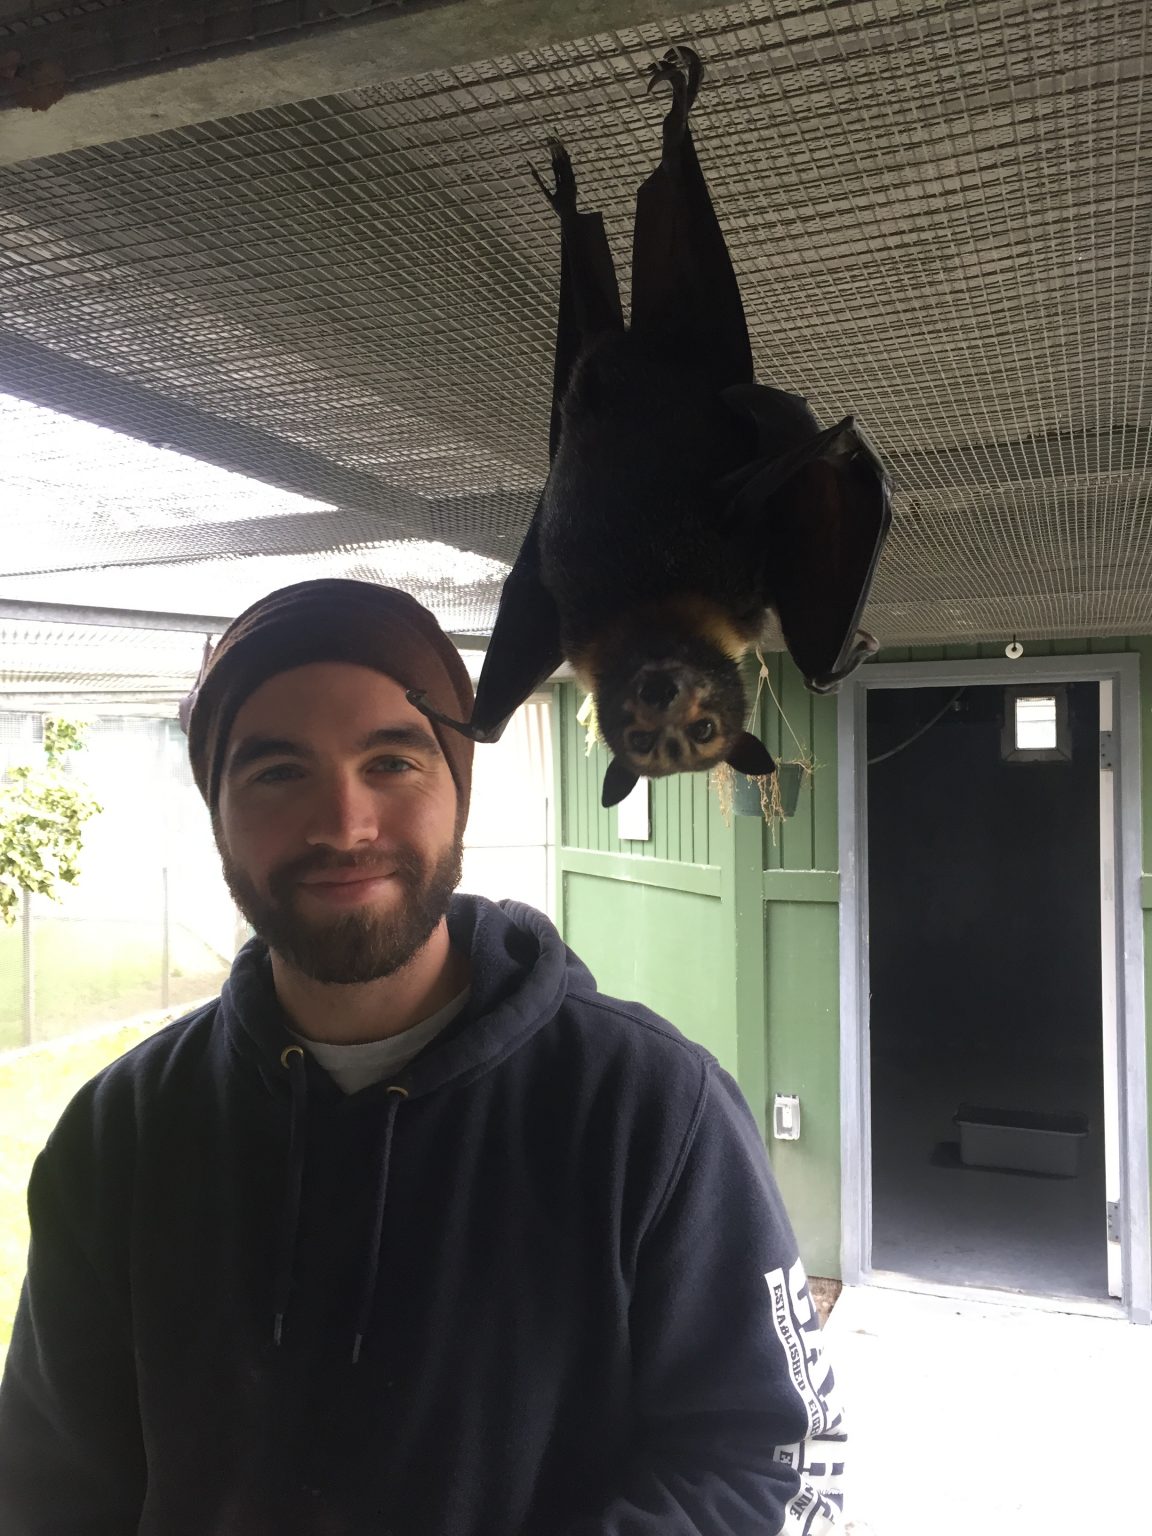 giant bat hanging from ceiling 